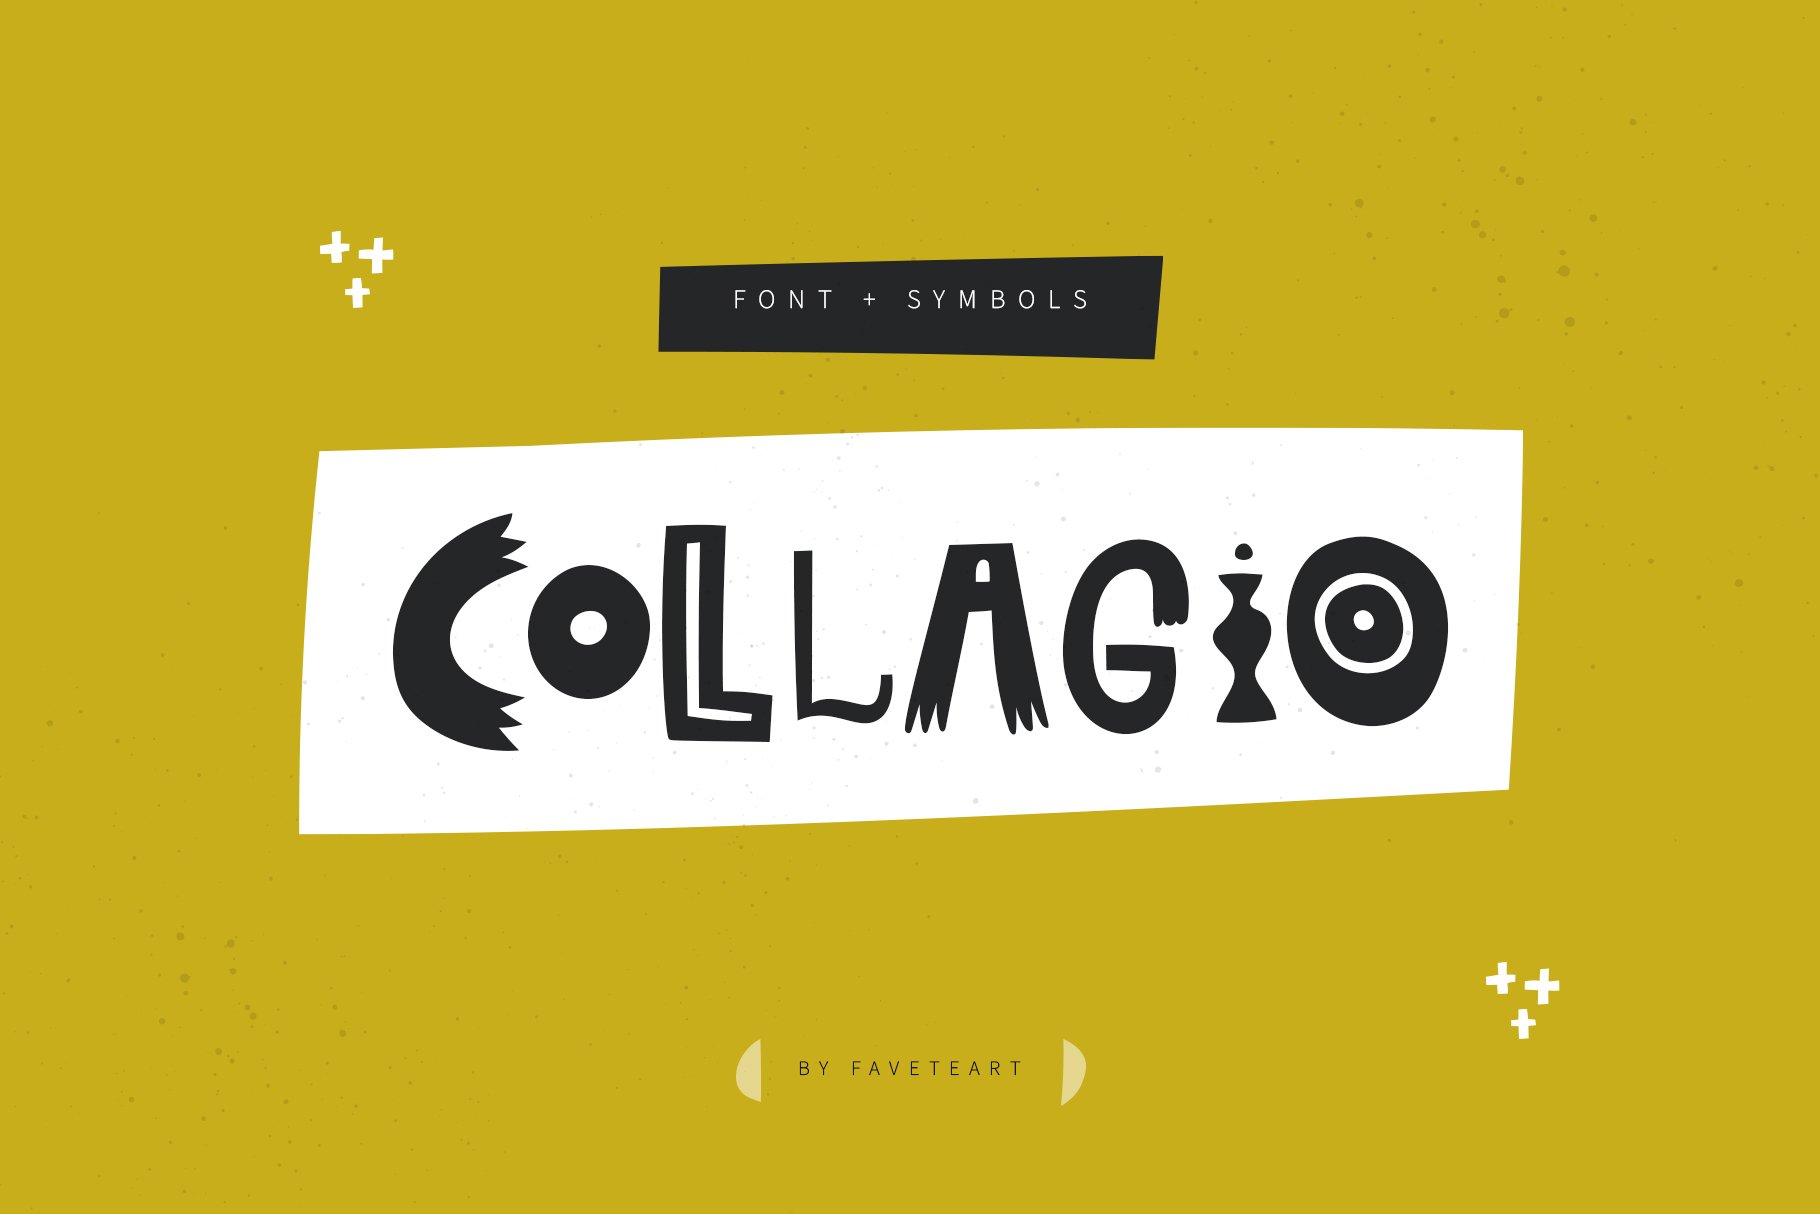 Collagio - display font cover image.